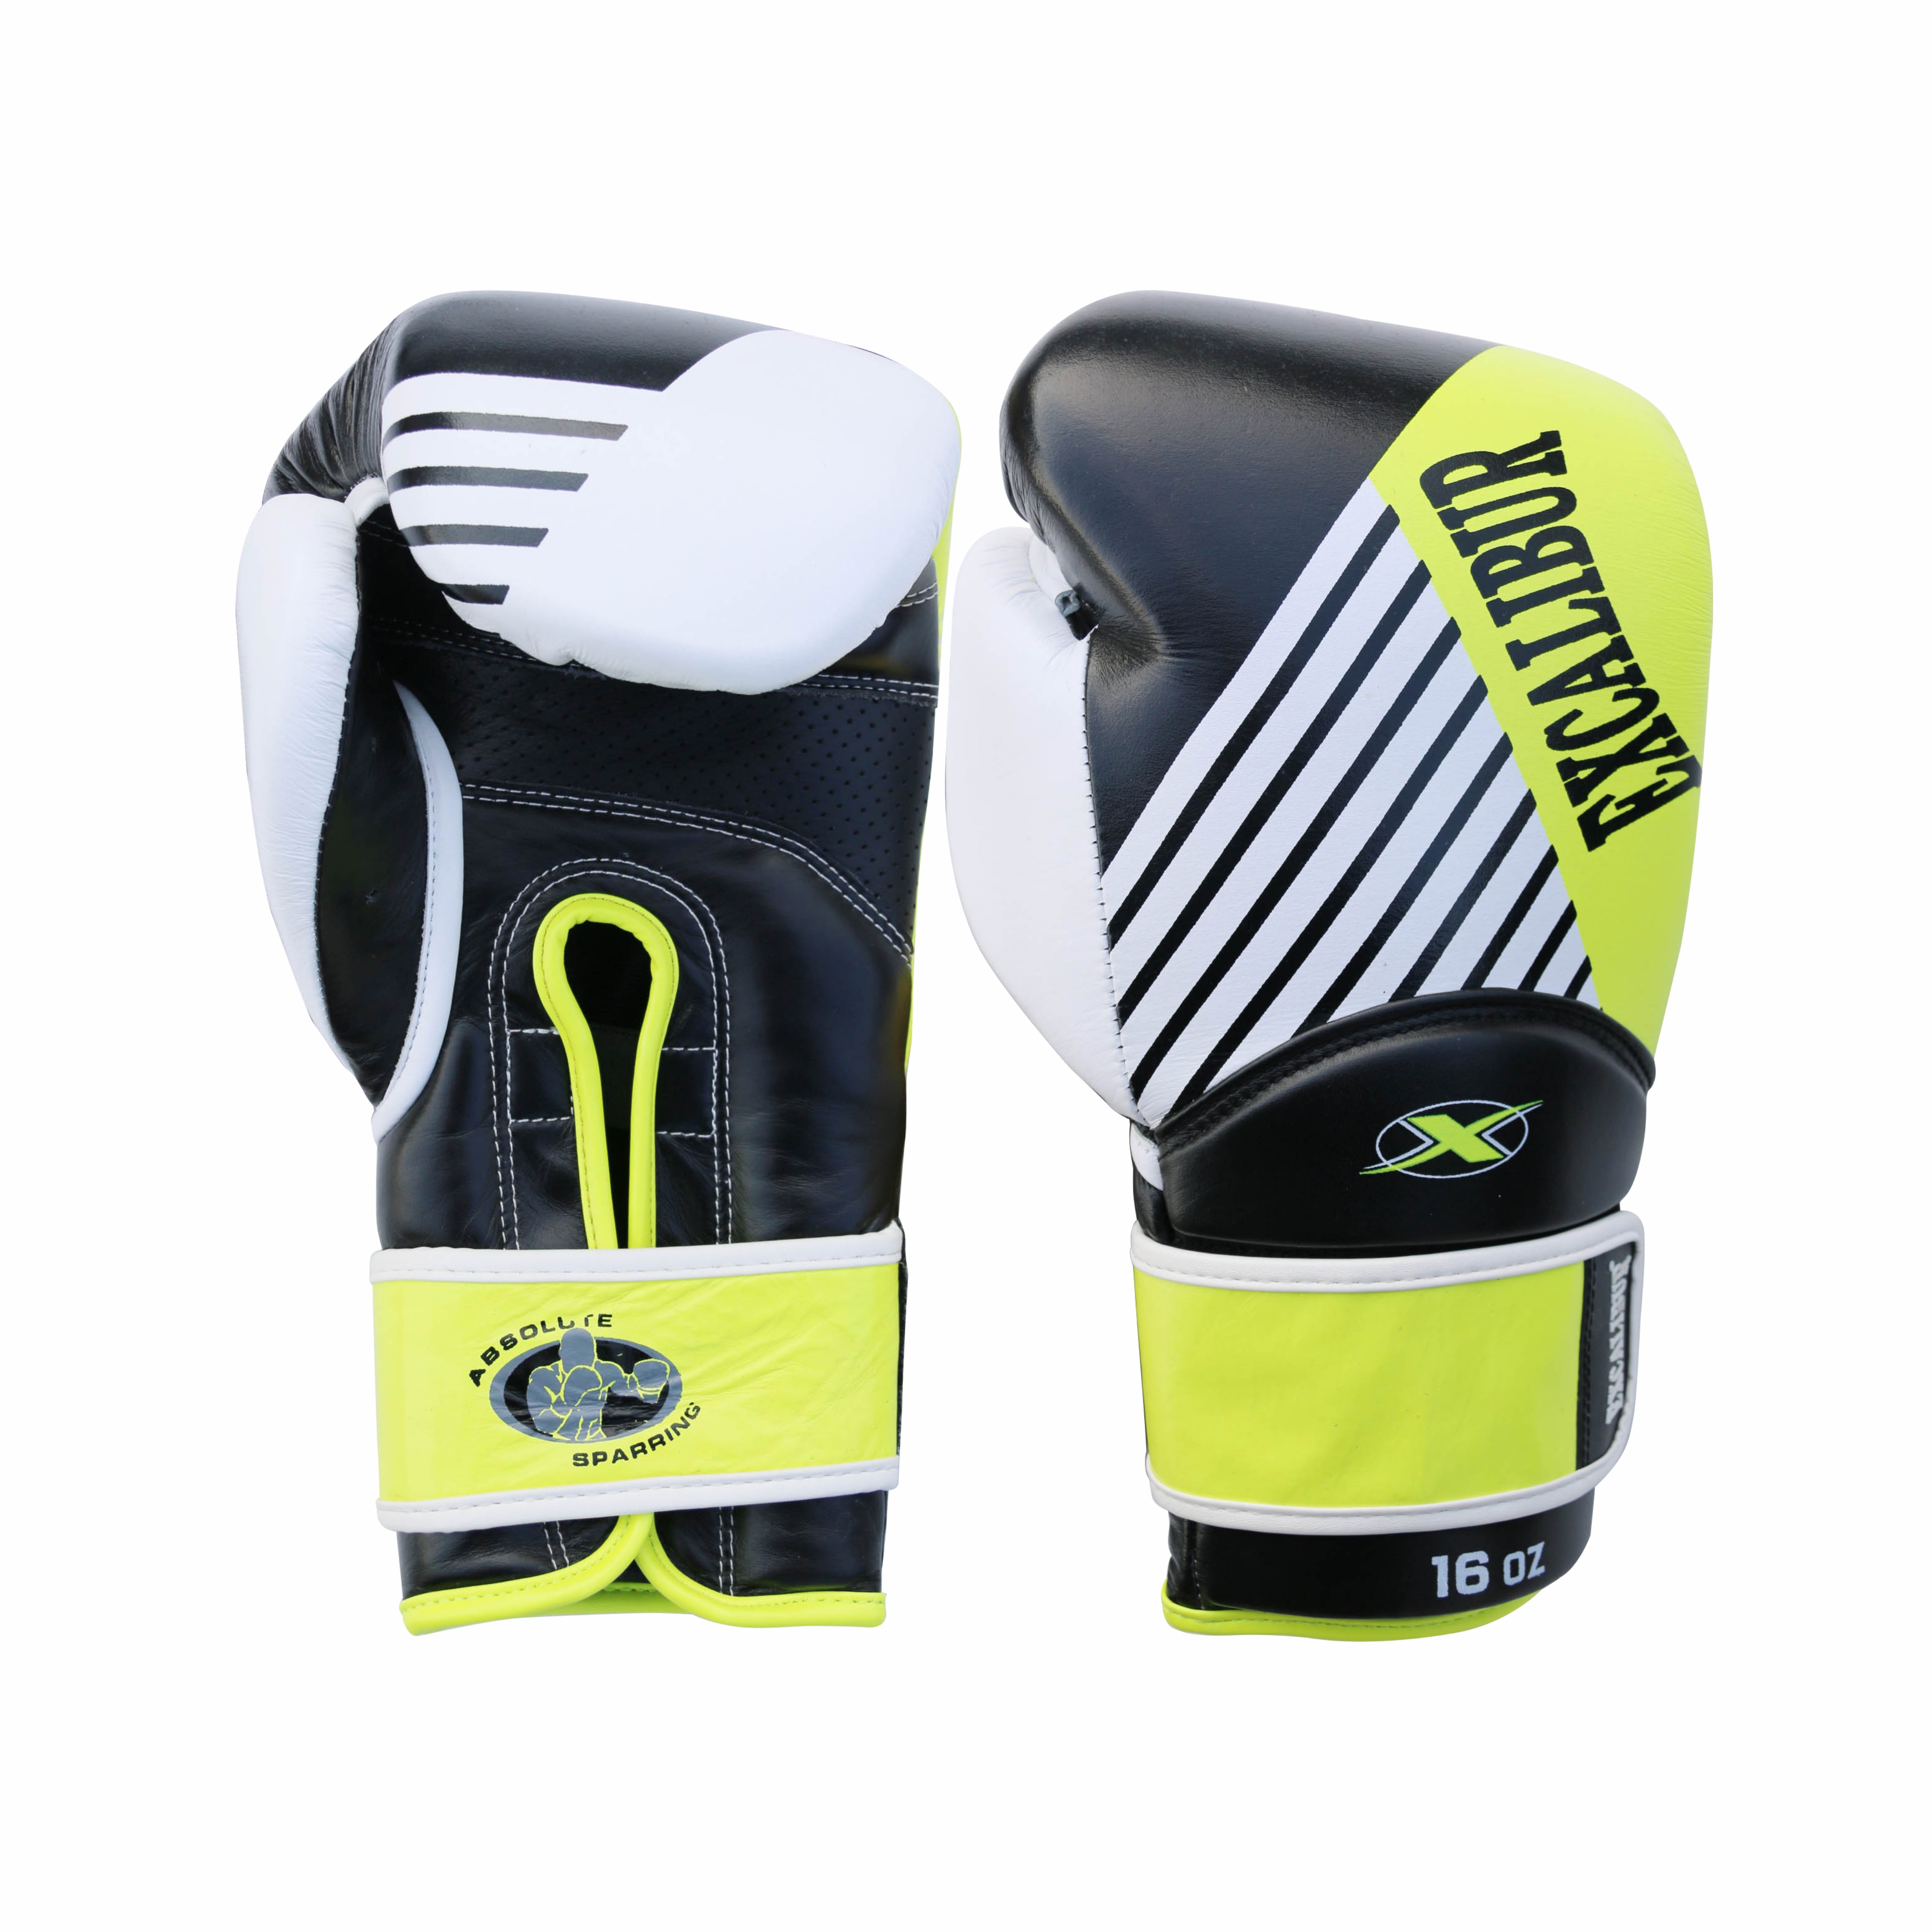 Absolute Sparring Boxing Gloves